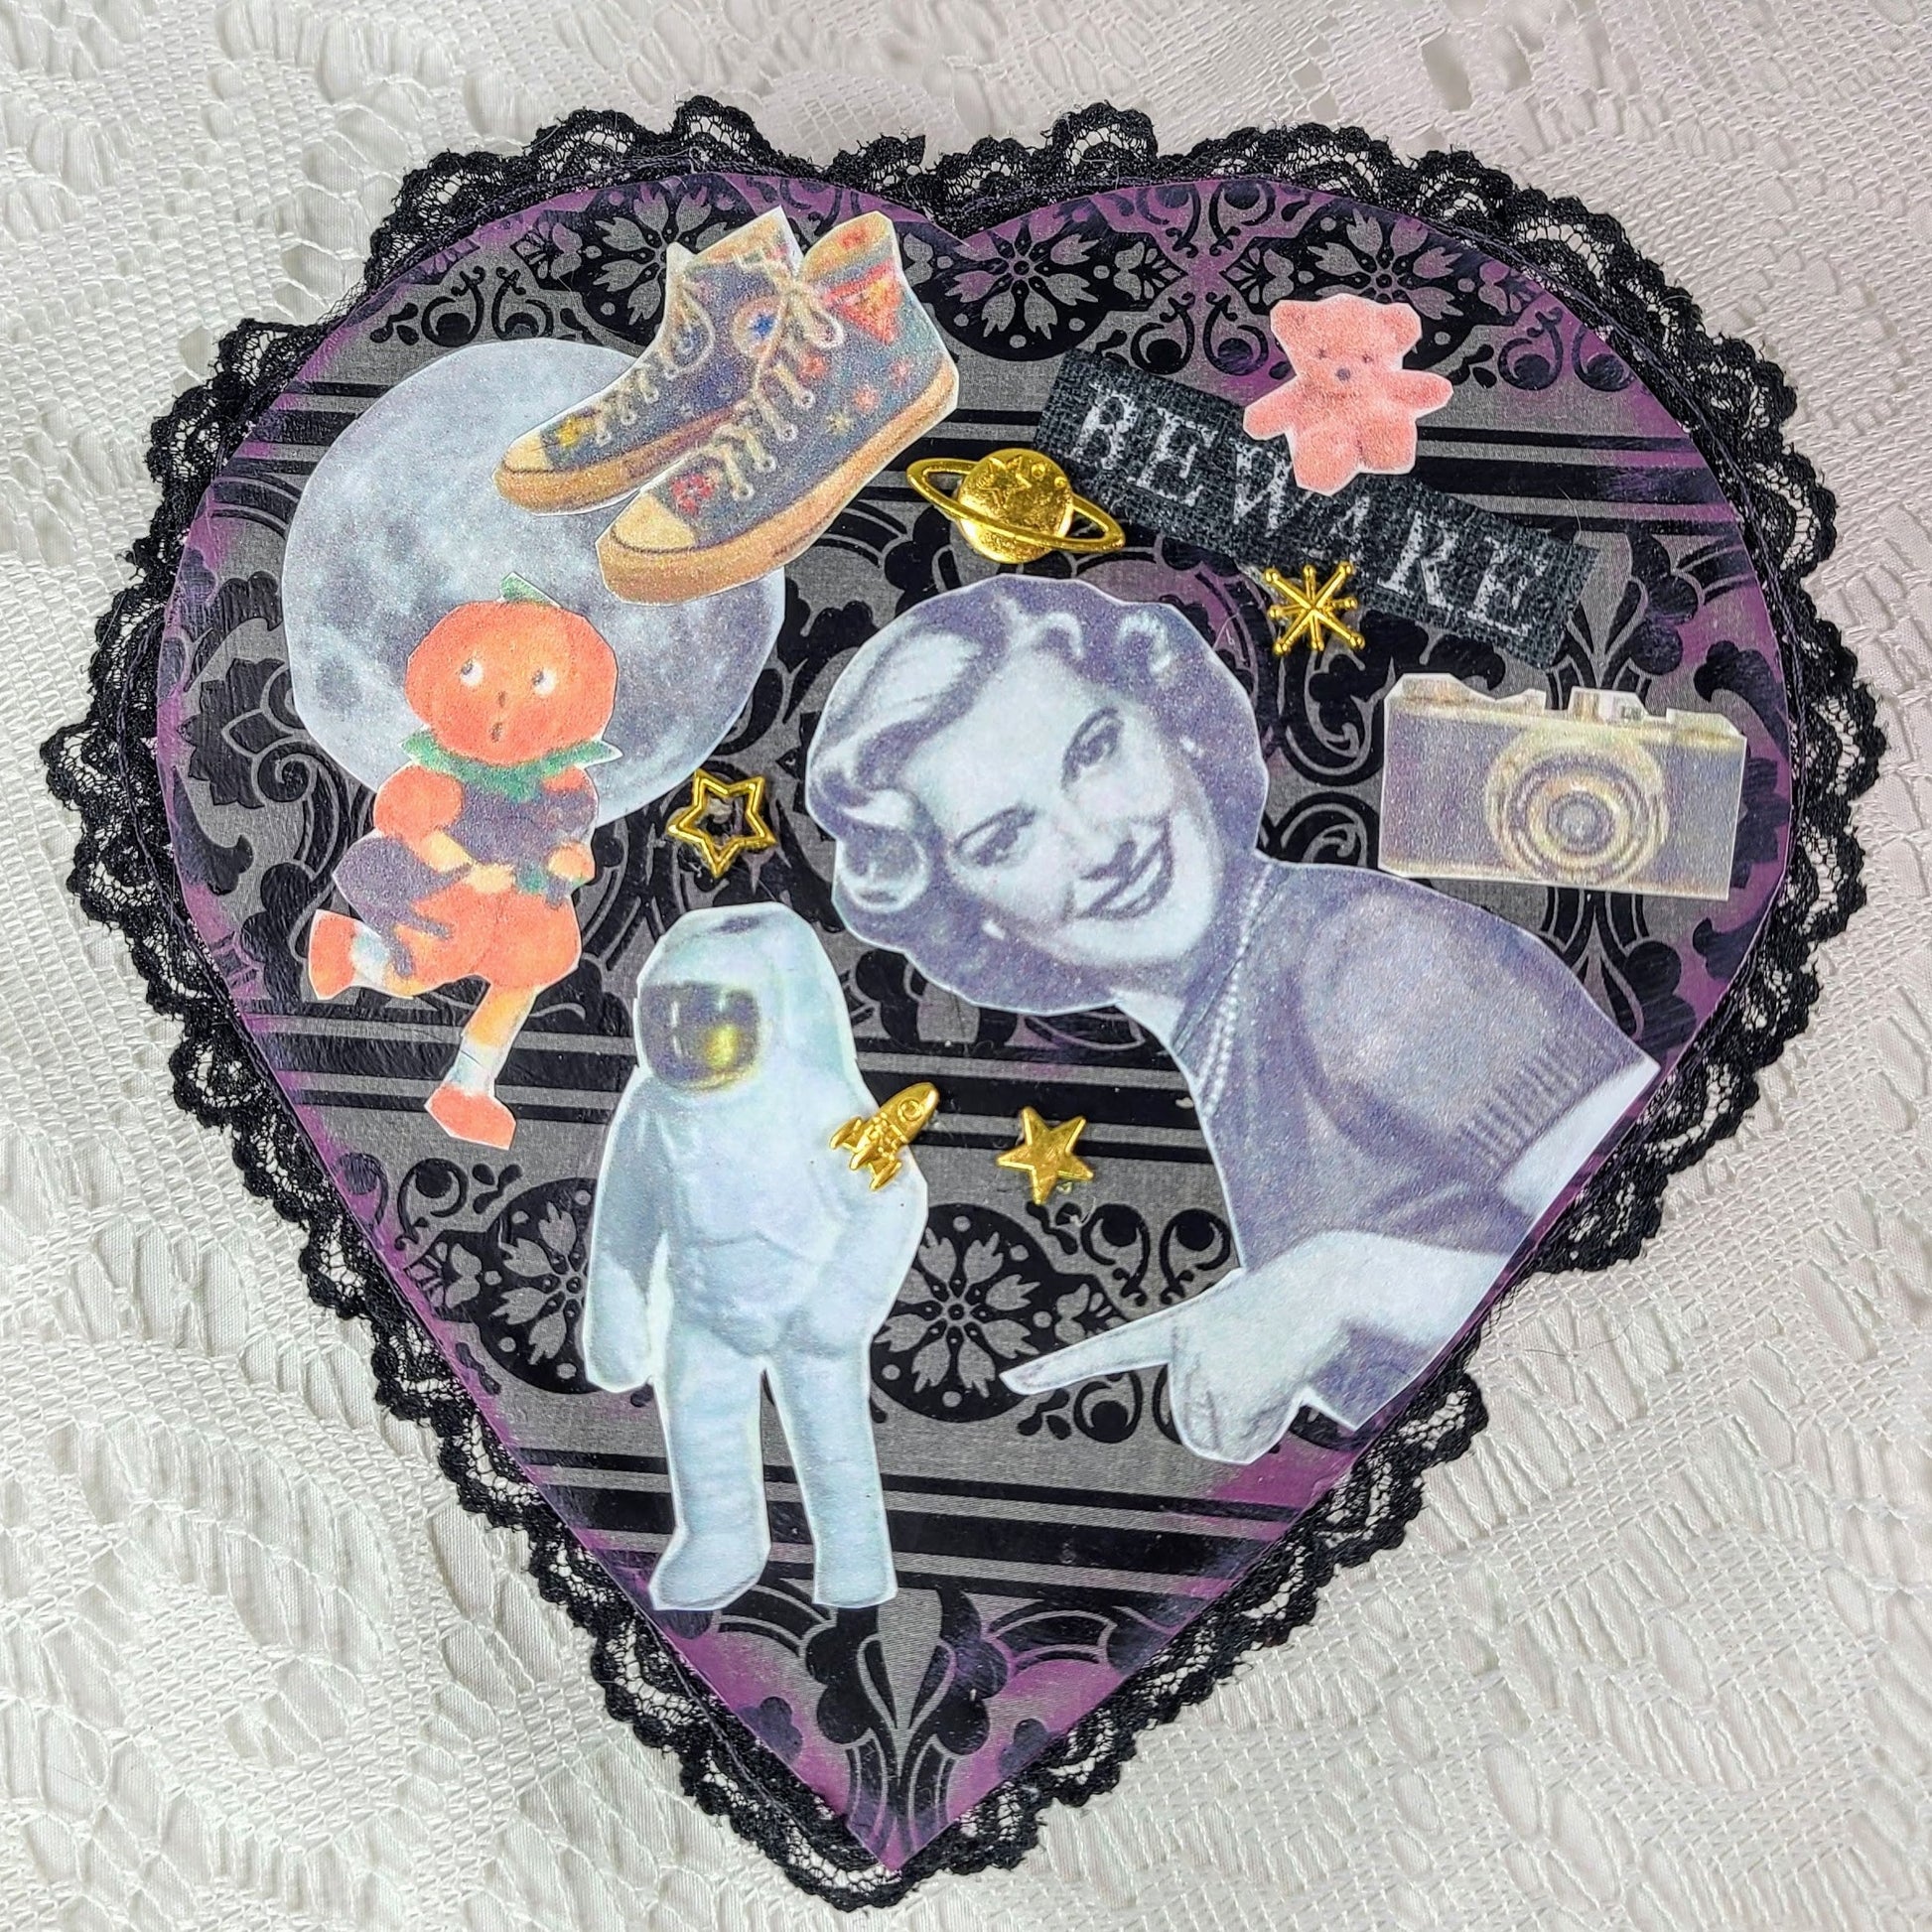 Unique Astronaut Wife Collage Mixed Media Heart Shaped Trinket Box ~ Love Magick ~ Filled with Goodies ~ OOAK Box plus Mini Love Candle, Spell Jar, Fairy Bell and Crystals ~ Valentine's Day Gift